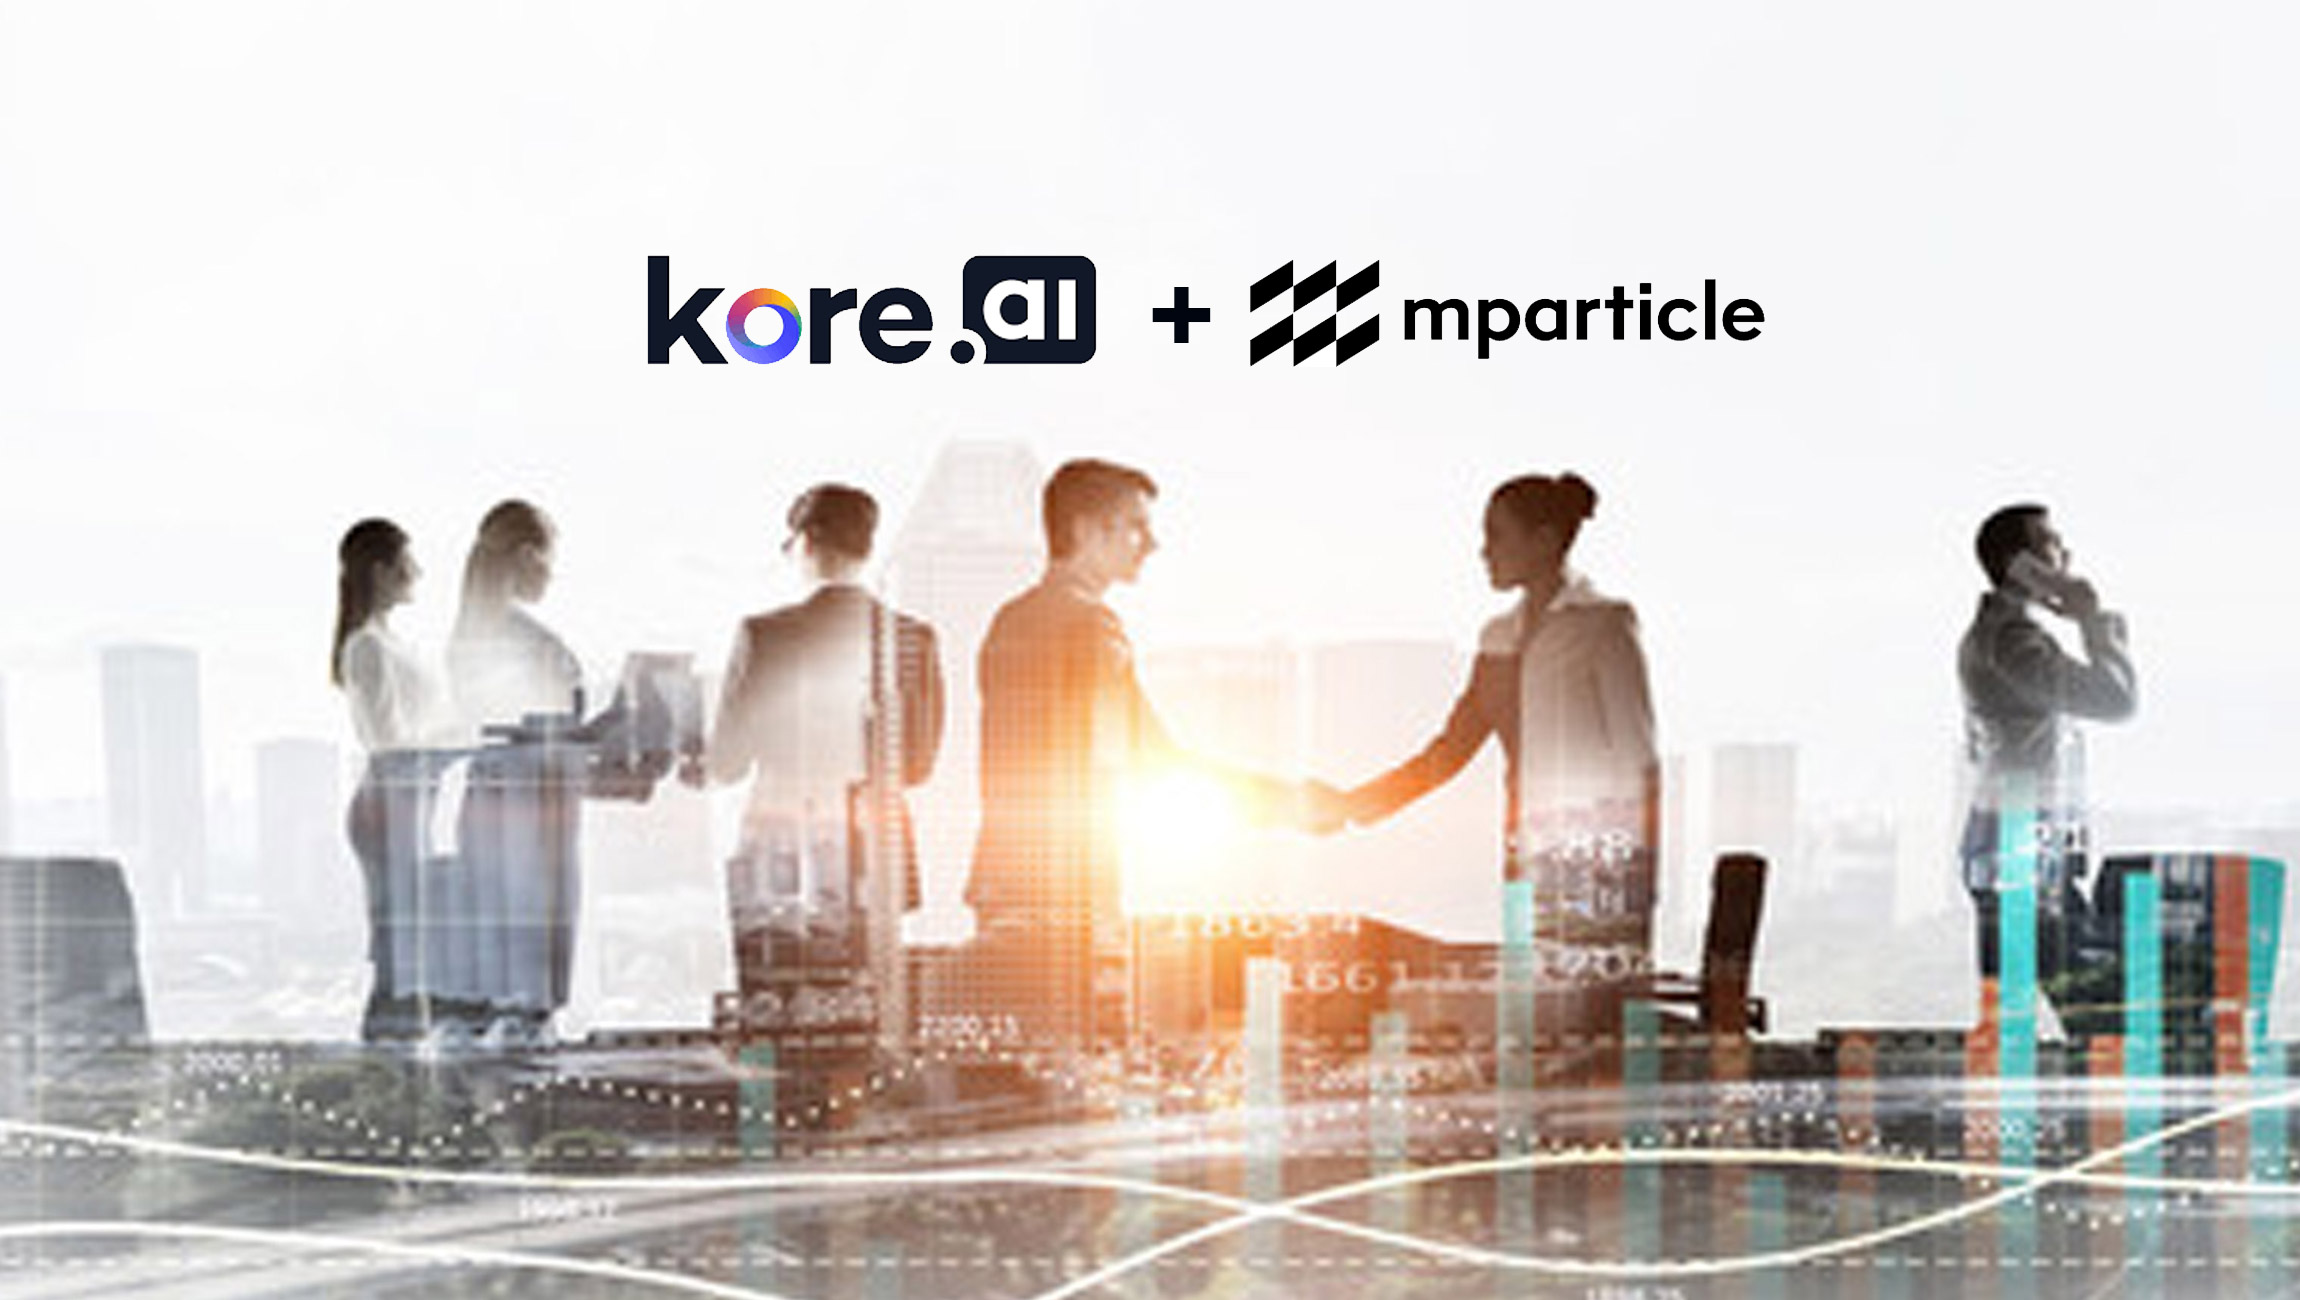 Kore.ai, mParticle Partner to Meet Increased Demand for Retail Shopping Personalization 1